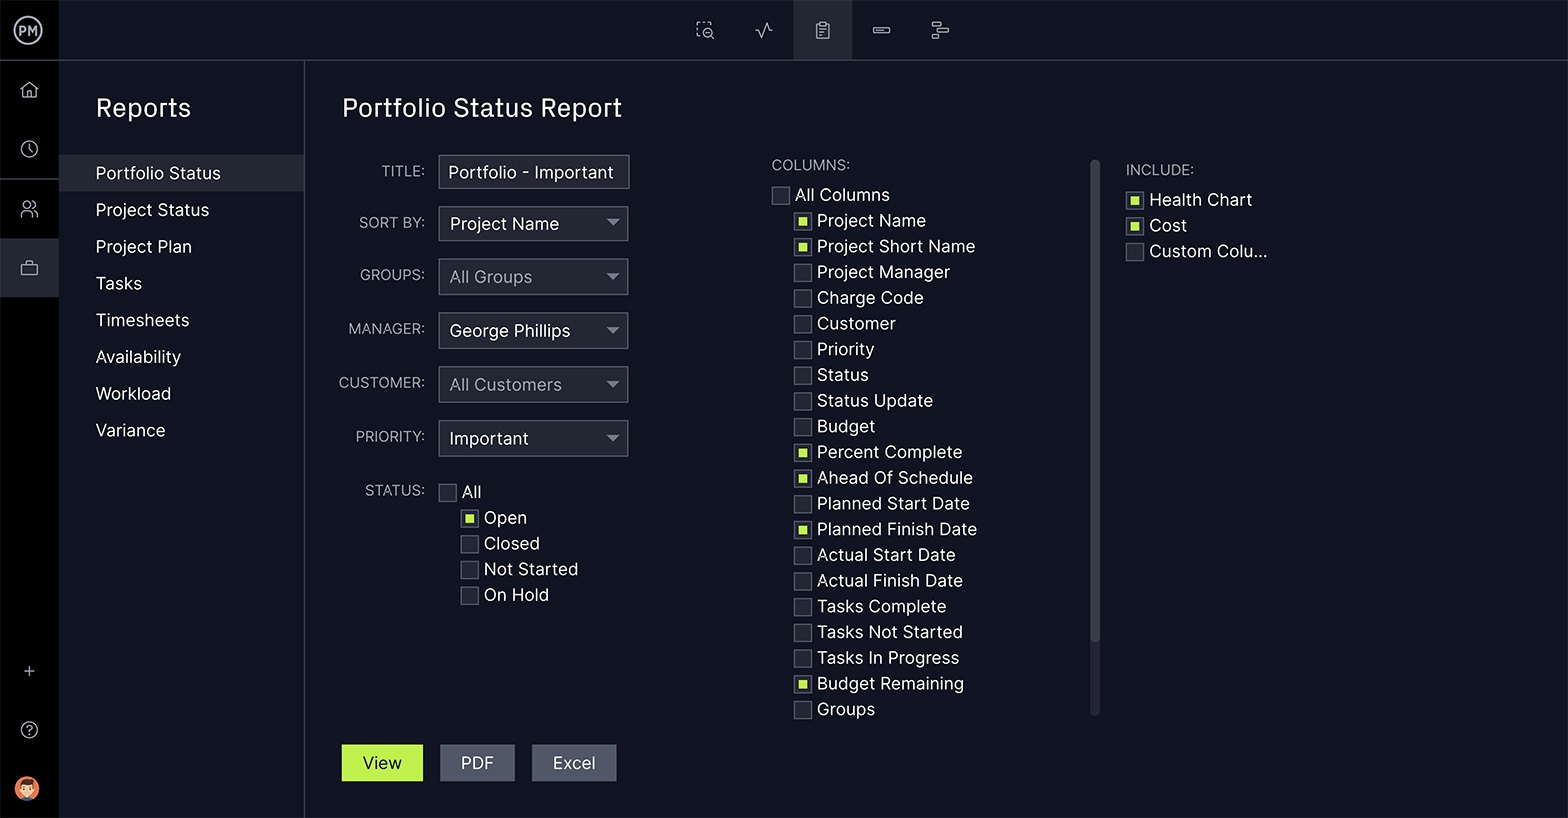 Project portfolio management software with reporting tools